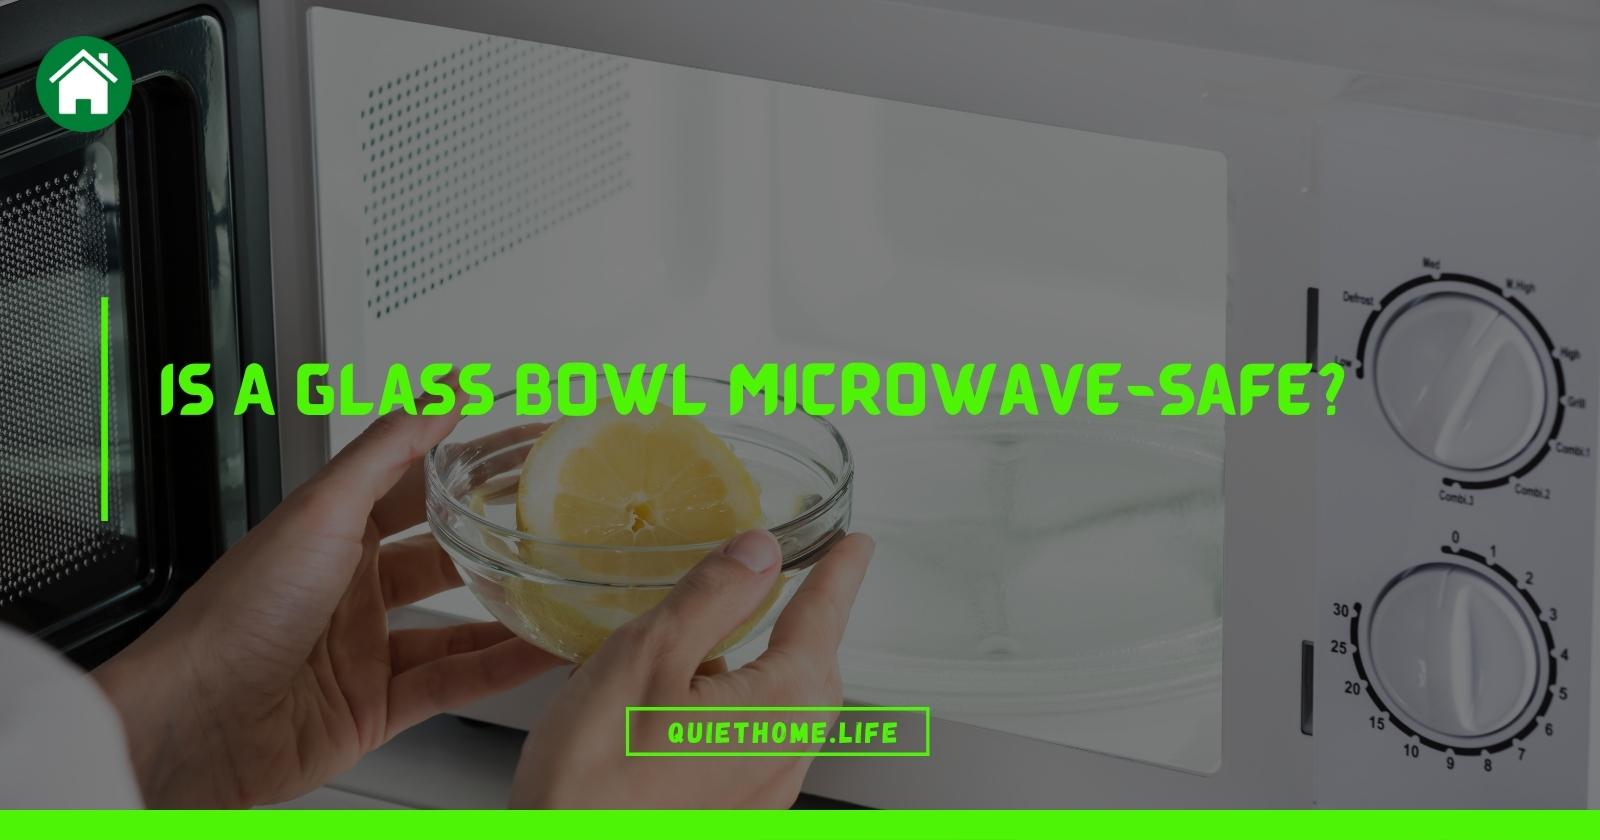 Is A Glass Bowl Microwave-Safe